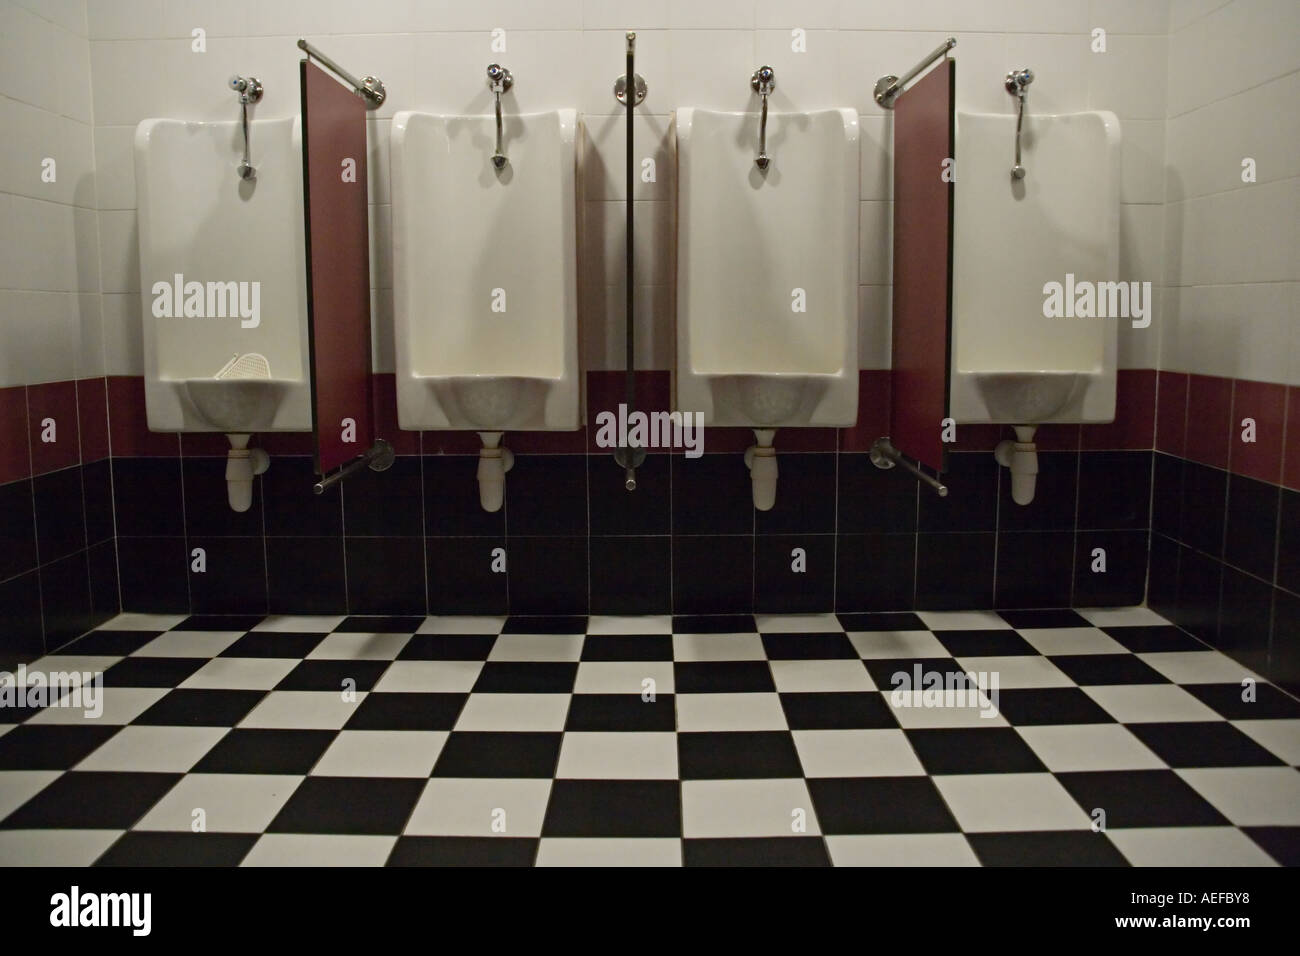 https://c8.alamy.com/comp/AEFBY8/stock-photo-of-a-public-men-s-room-with-four-urinals-showing-a-black-AEFBY8.jpg